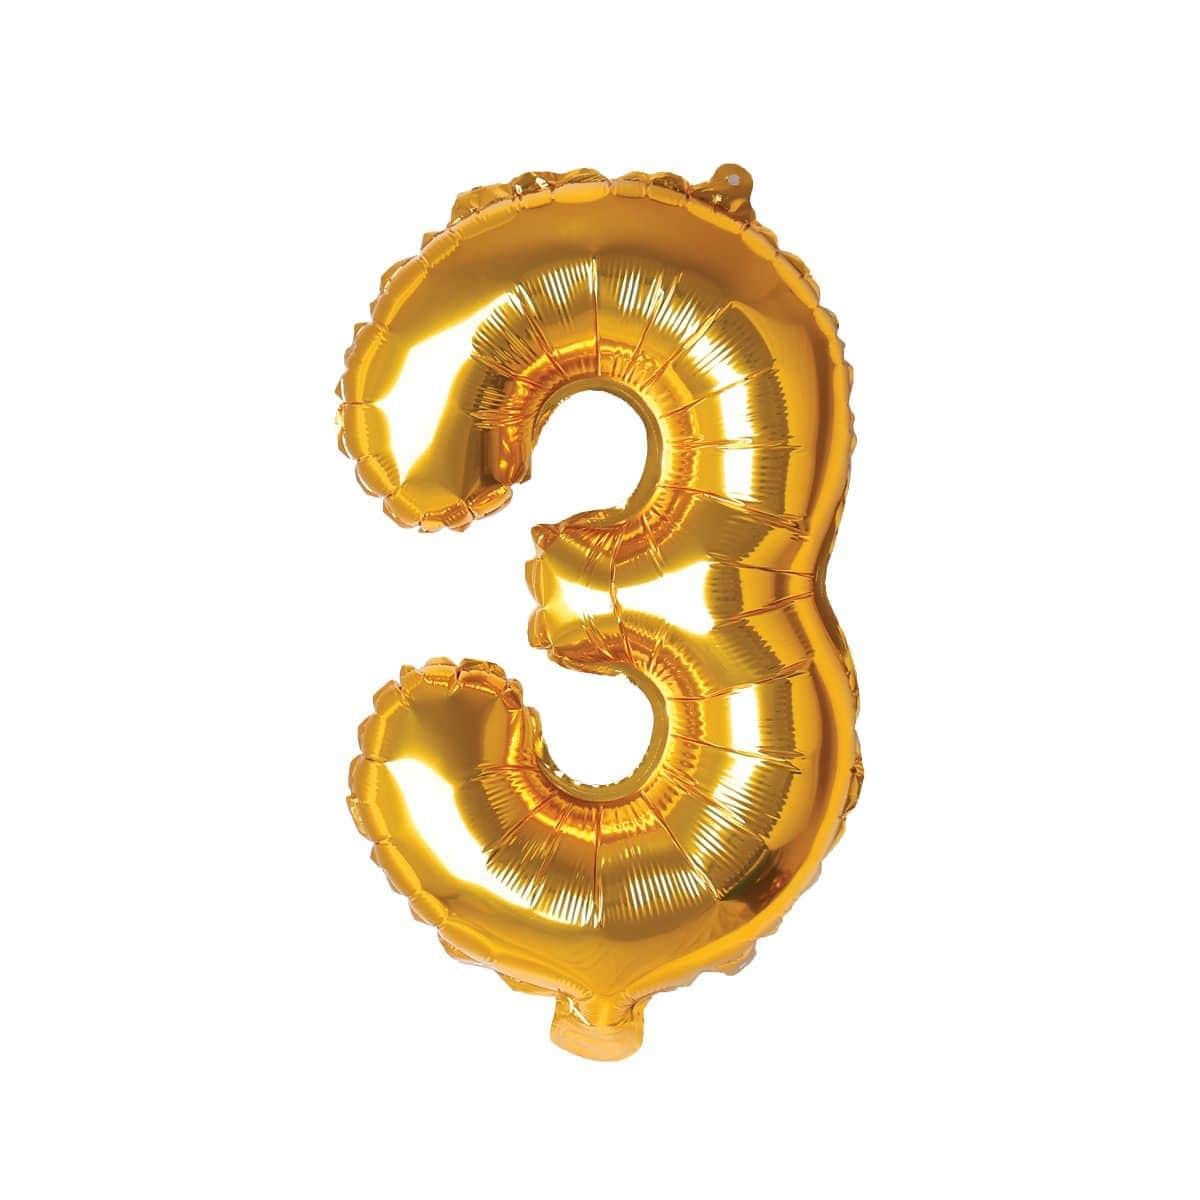 Buy Balloons Gold Number 3 Foil Balloon, 16 Inches sold at Party Expert